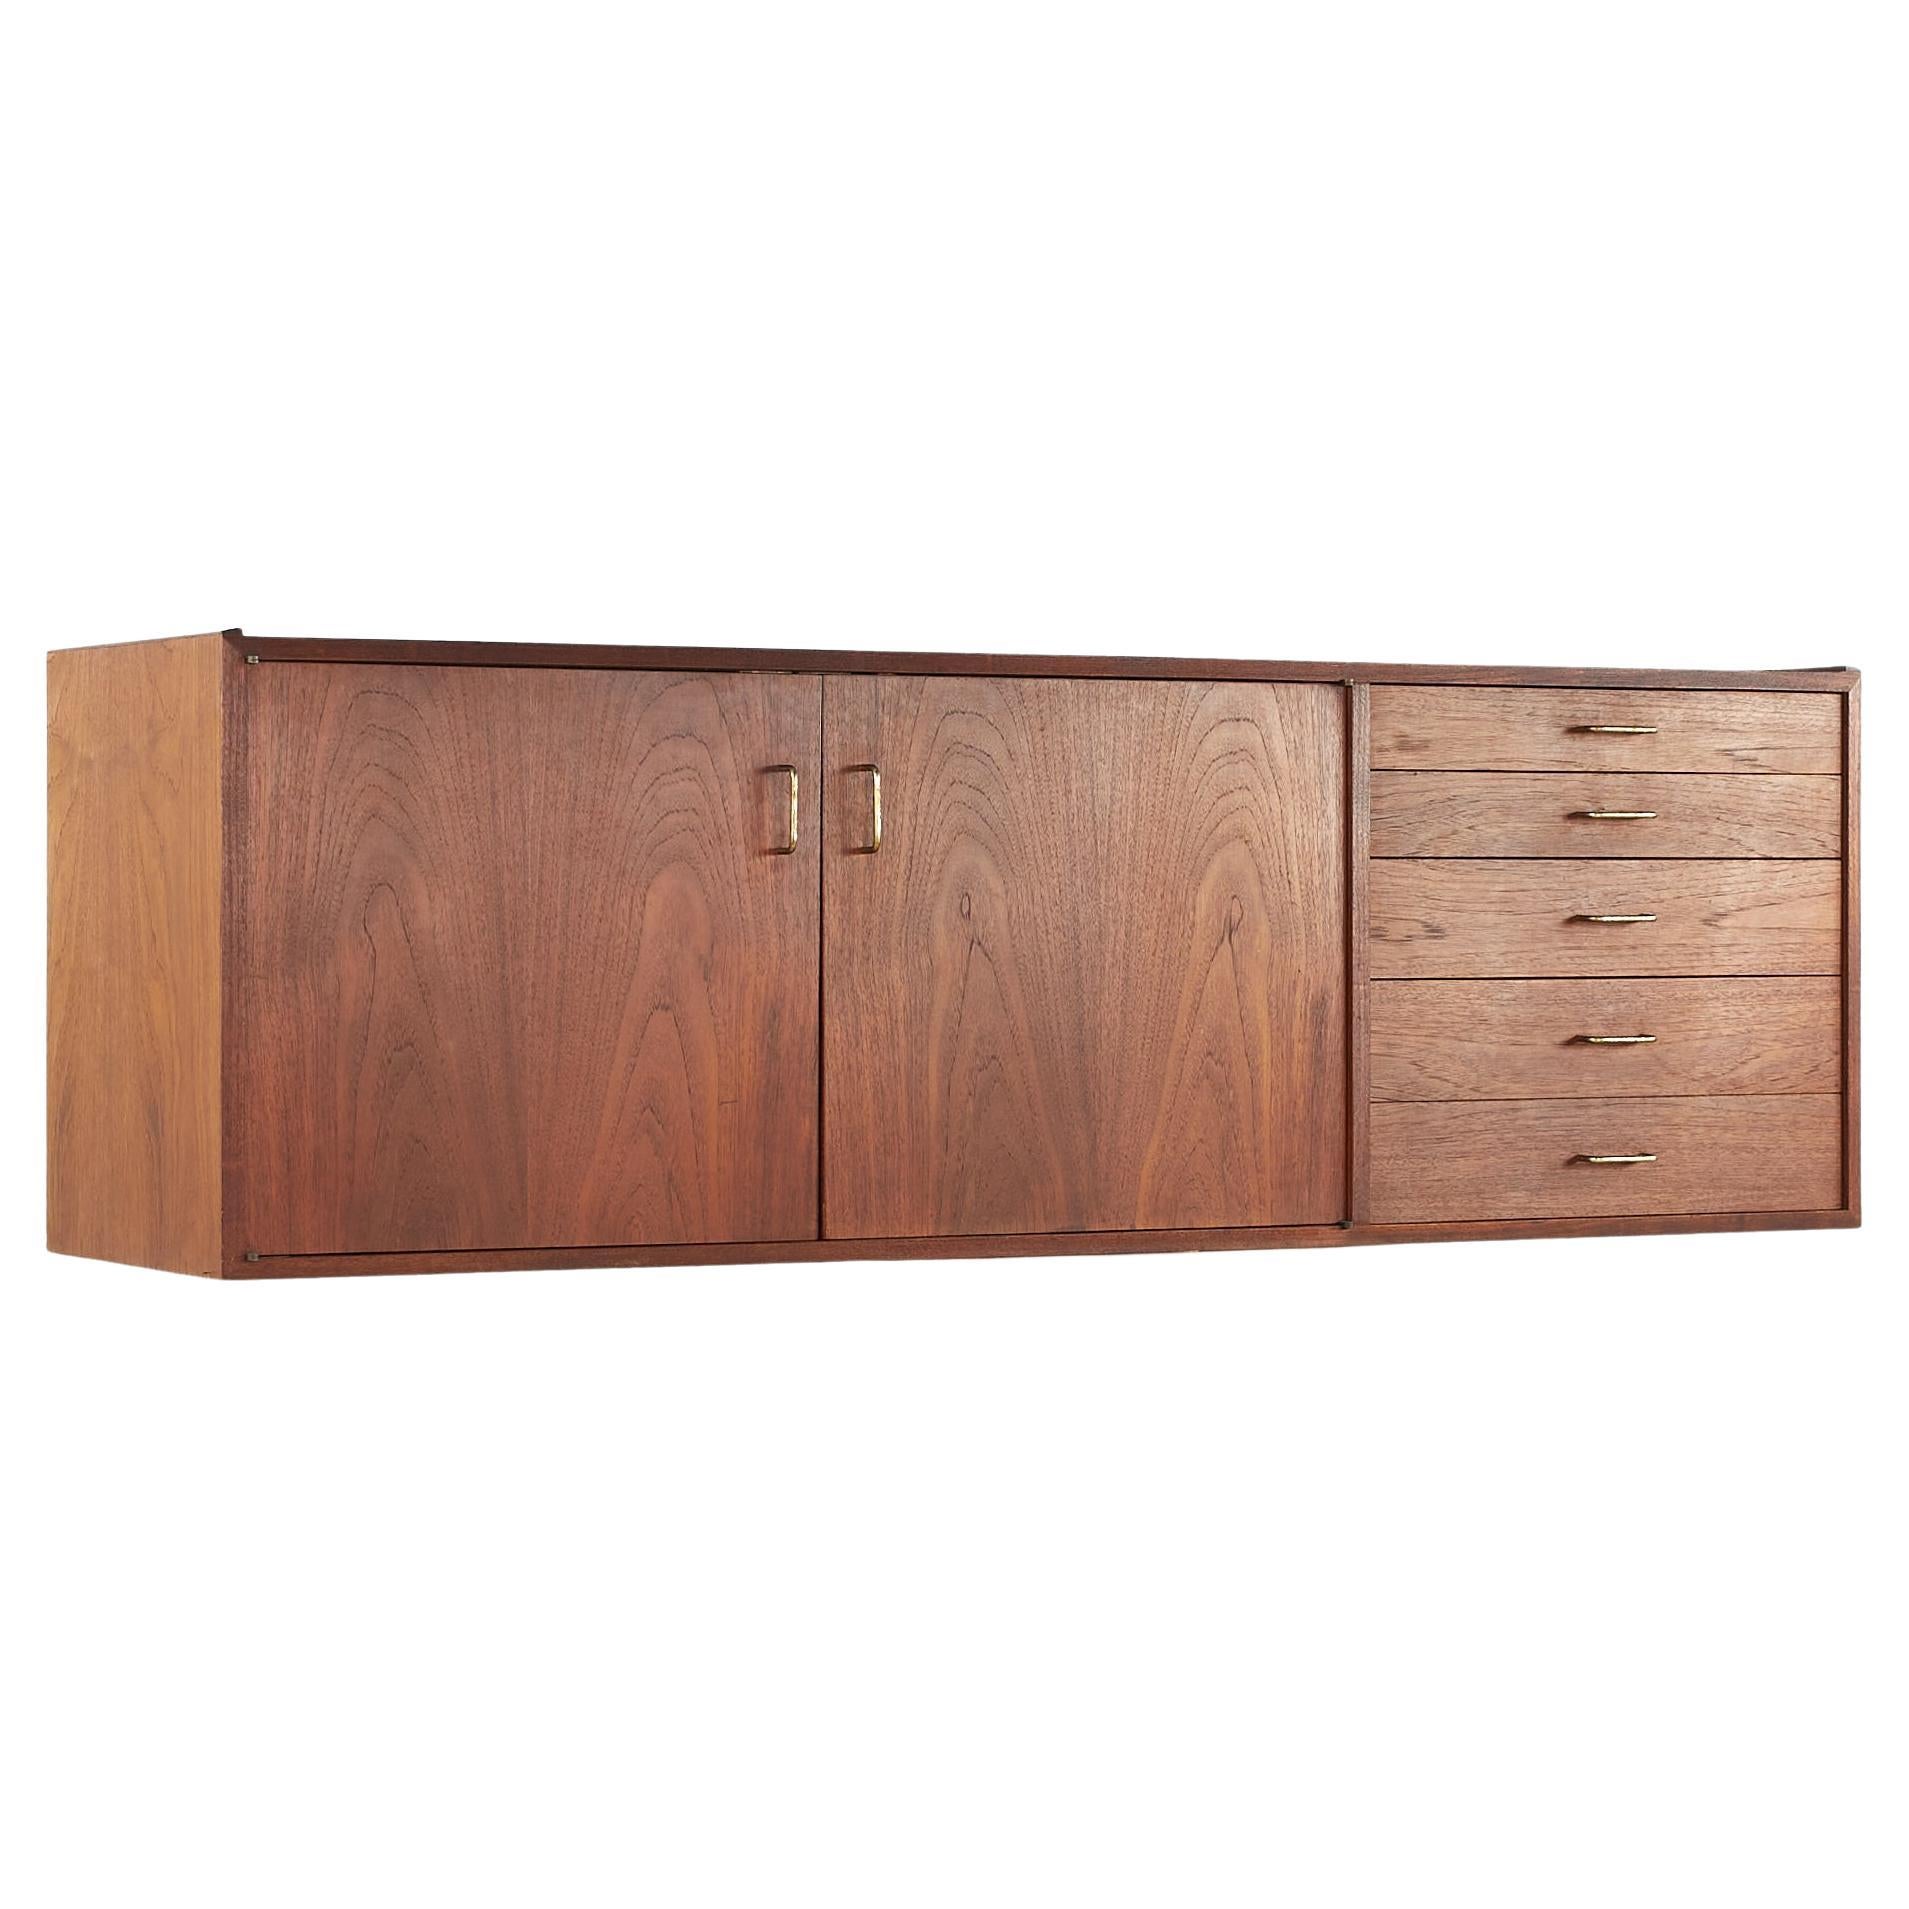 SOLD 06/26/23 Jens Risom Midcentury Walnut and Brass Wall Mount Credenza